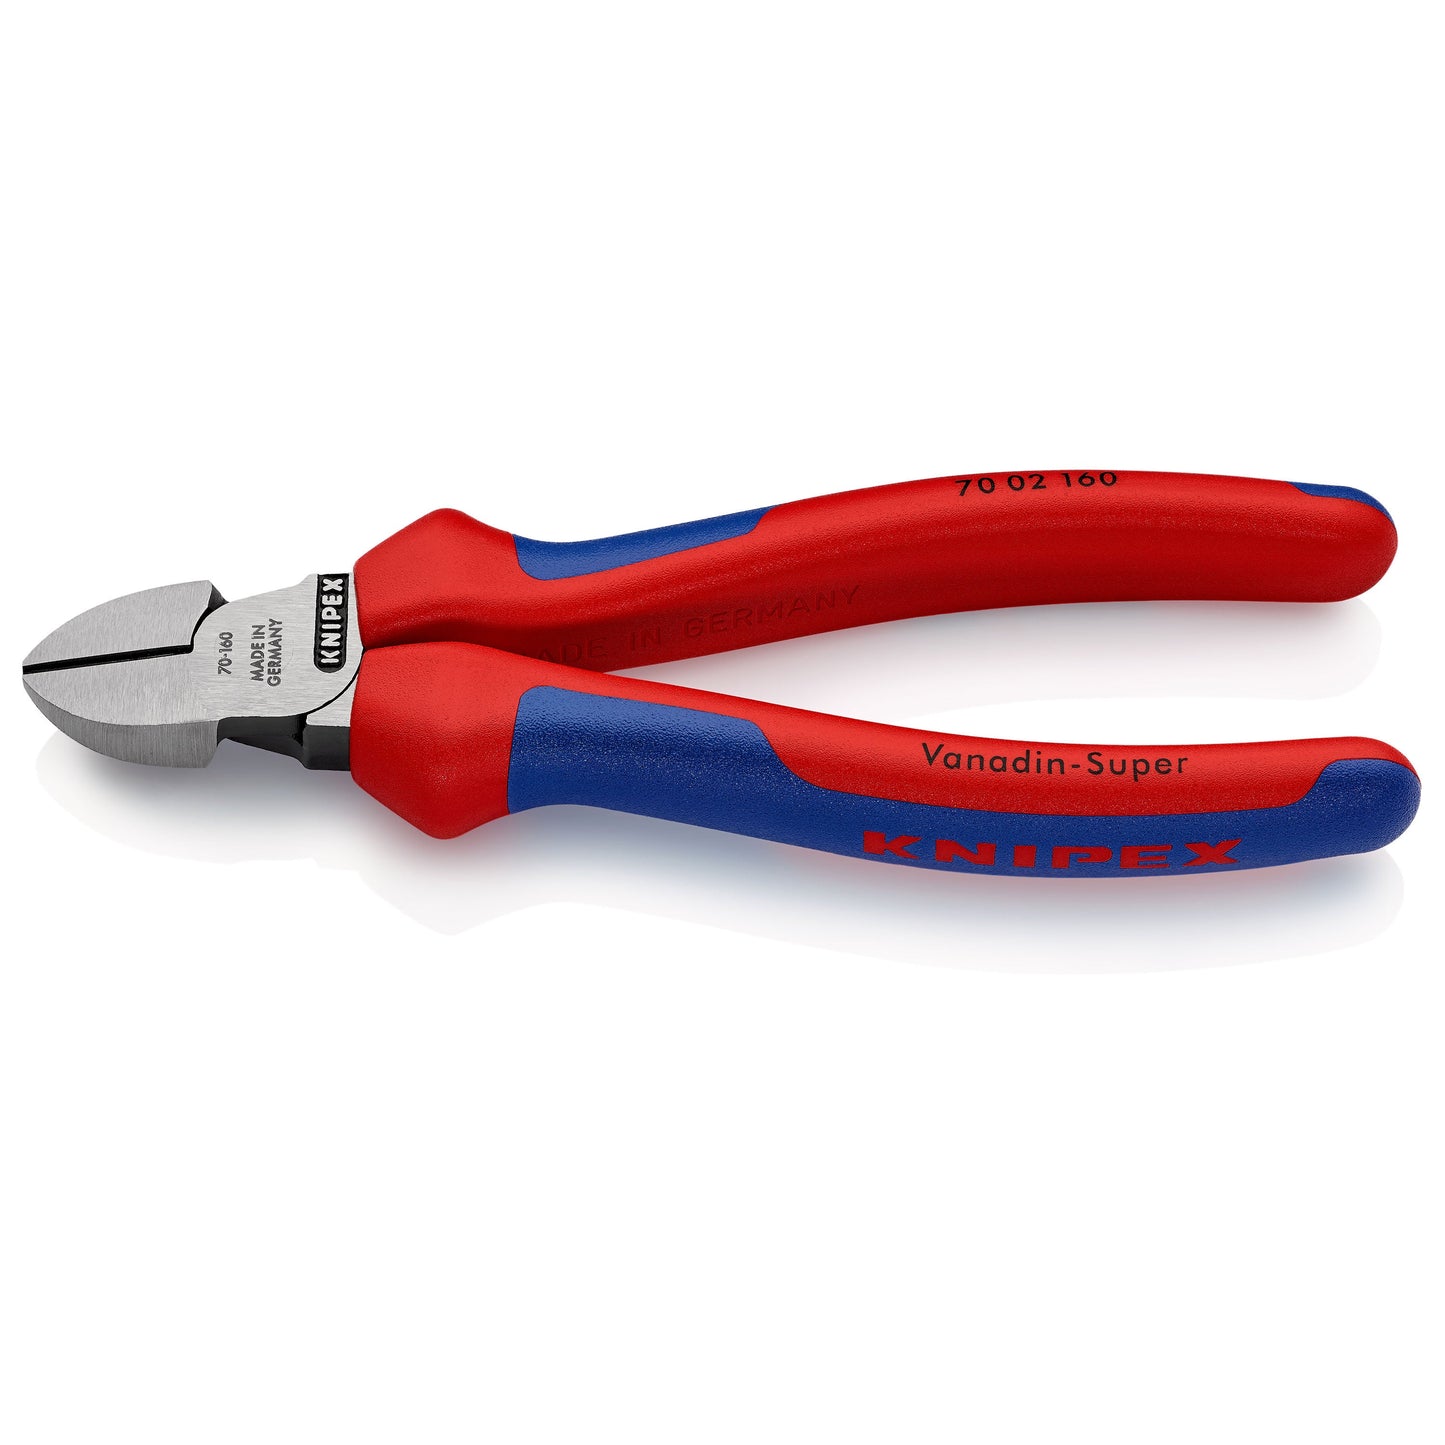 Knipex 70 02 160 - Diagonal cutting pliers 160 mm with two-component handles